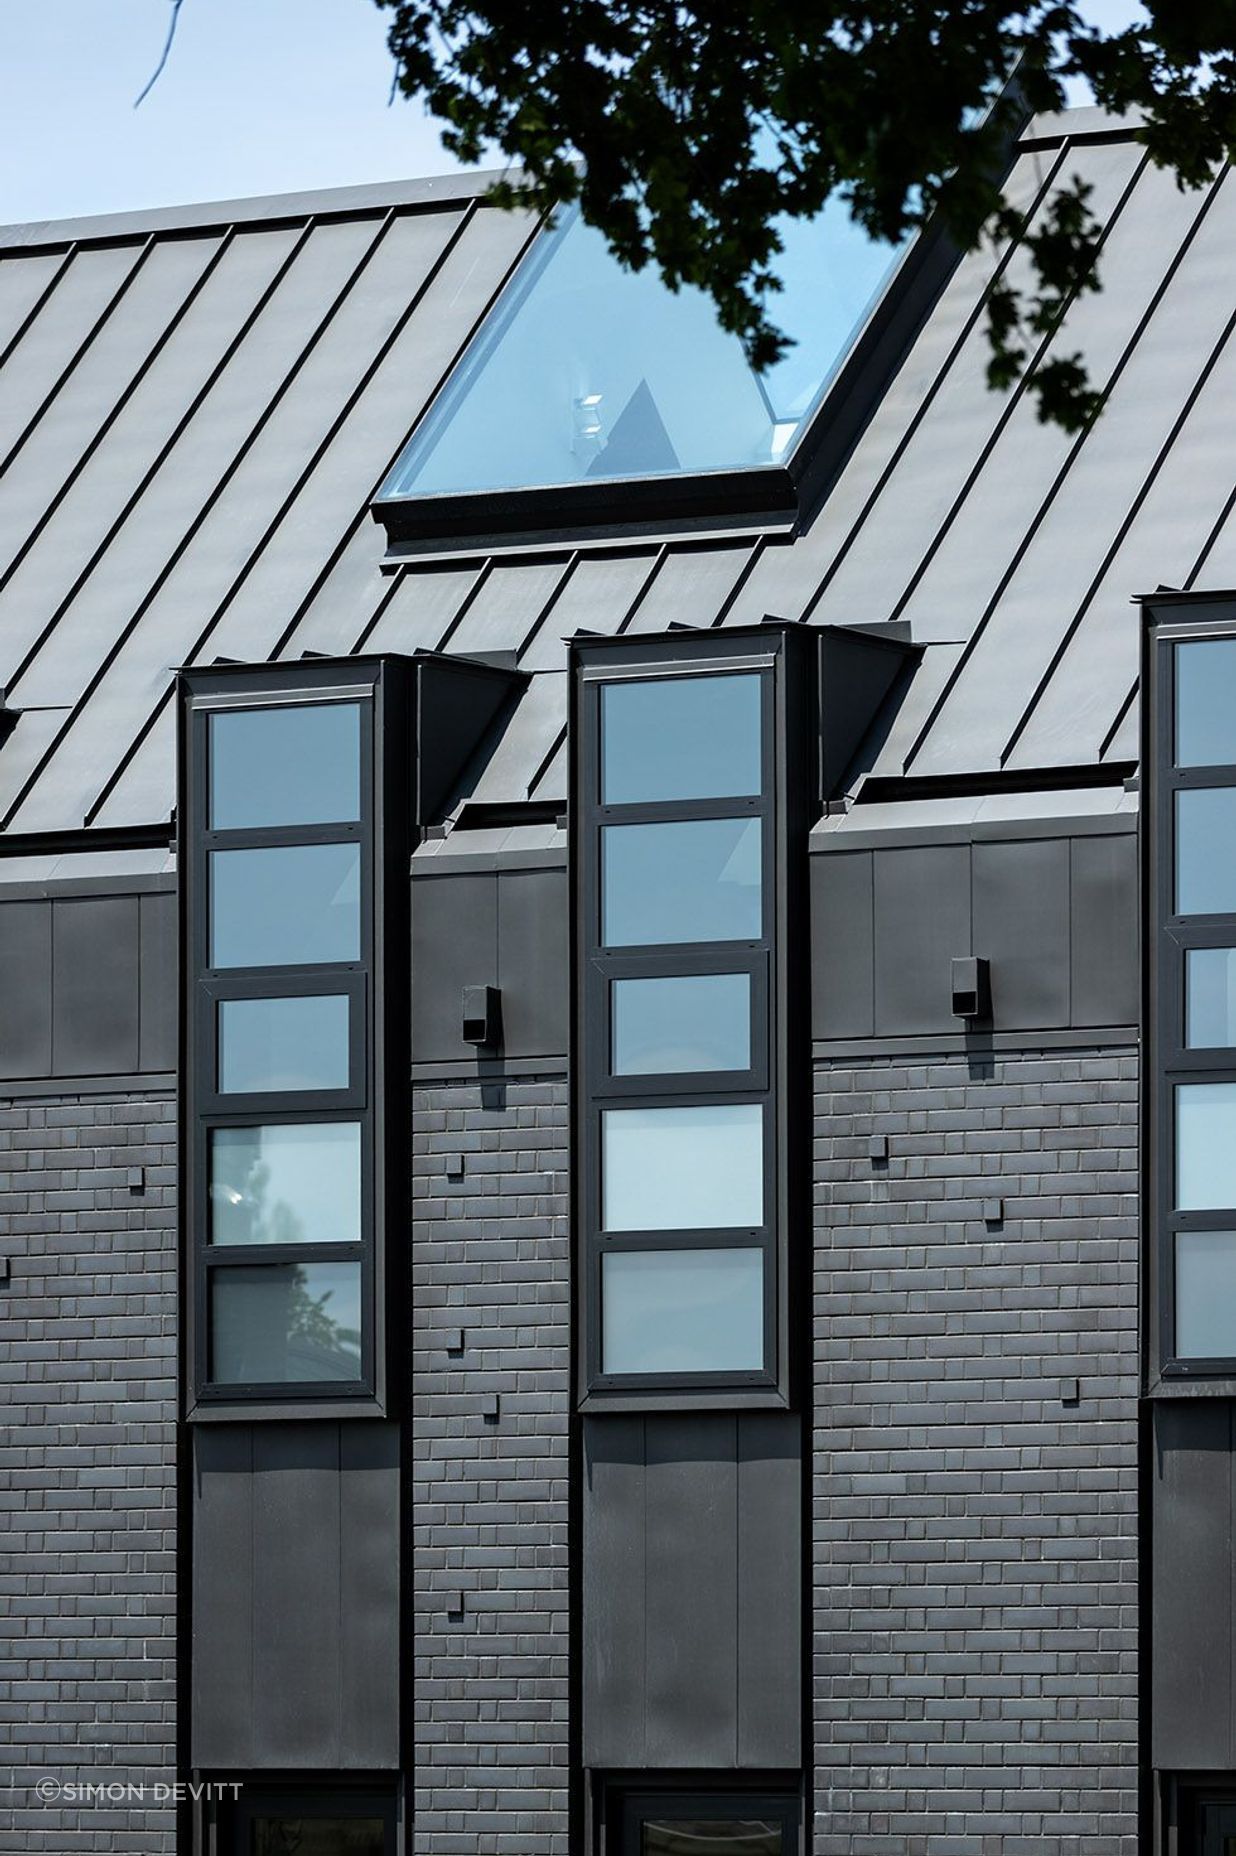 The northern facade is punctuated by a series of steel-lined dormer windows framing glimpses of borrowed landscapes from the neighbouring properties.